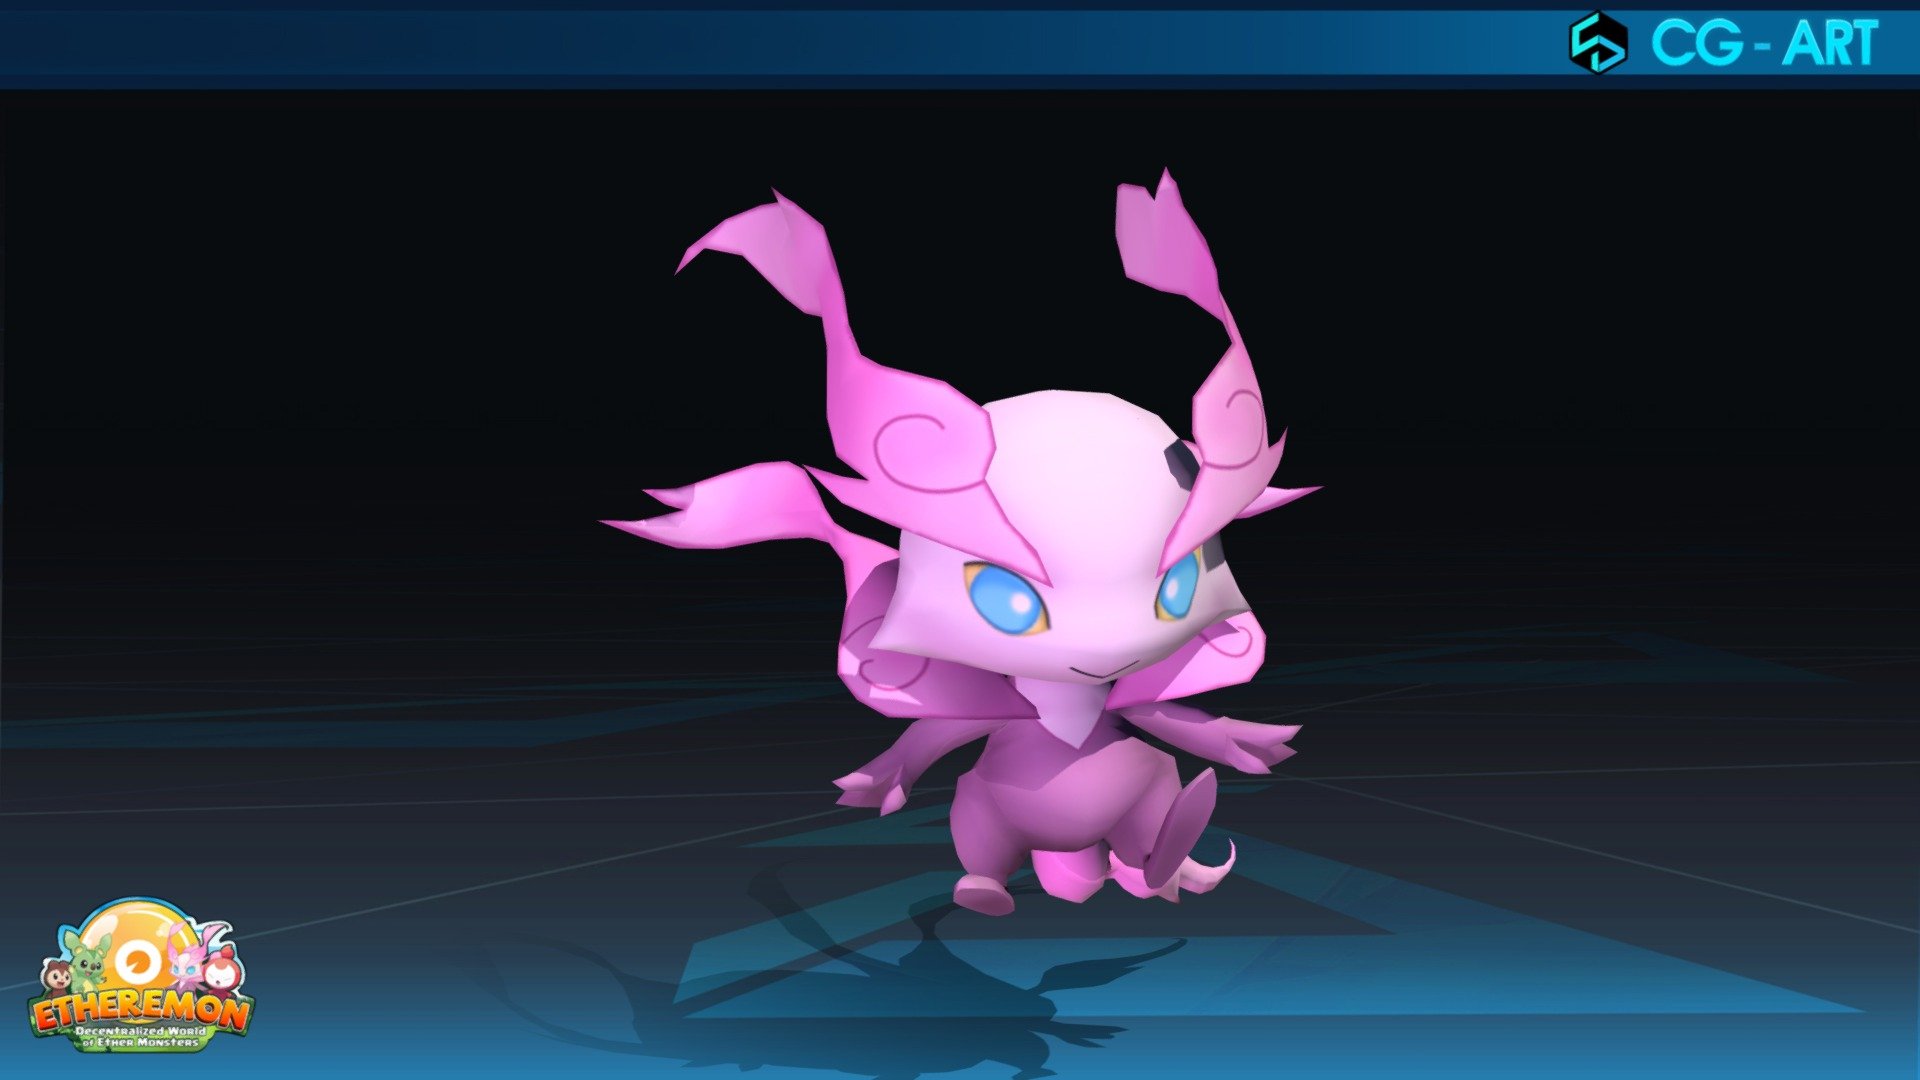 This is one of characters that we’ve outsourced to our client, a developer of the Etheremon game.
By the way, we would like to introduce this game to more players through the cute chareacters like this. The Beasties will be playable on every platform planned in our development roadmap, including the web, mobile, and 3D/VR/Decentraland versions.
https://www.etheremon.com/
 - Intelix_3D Monster - 3D model by cgart.com (@goart) 3d model